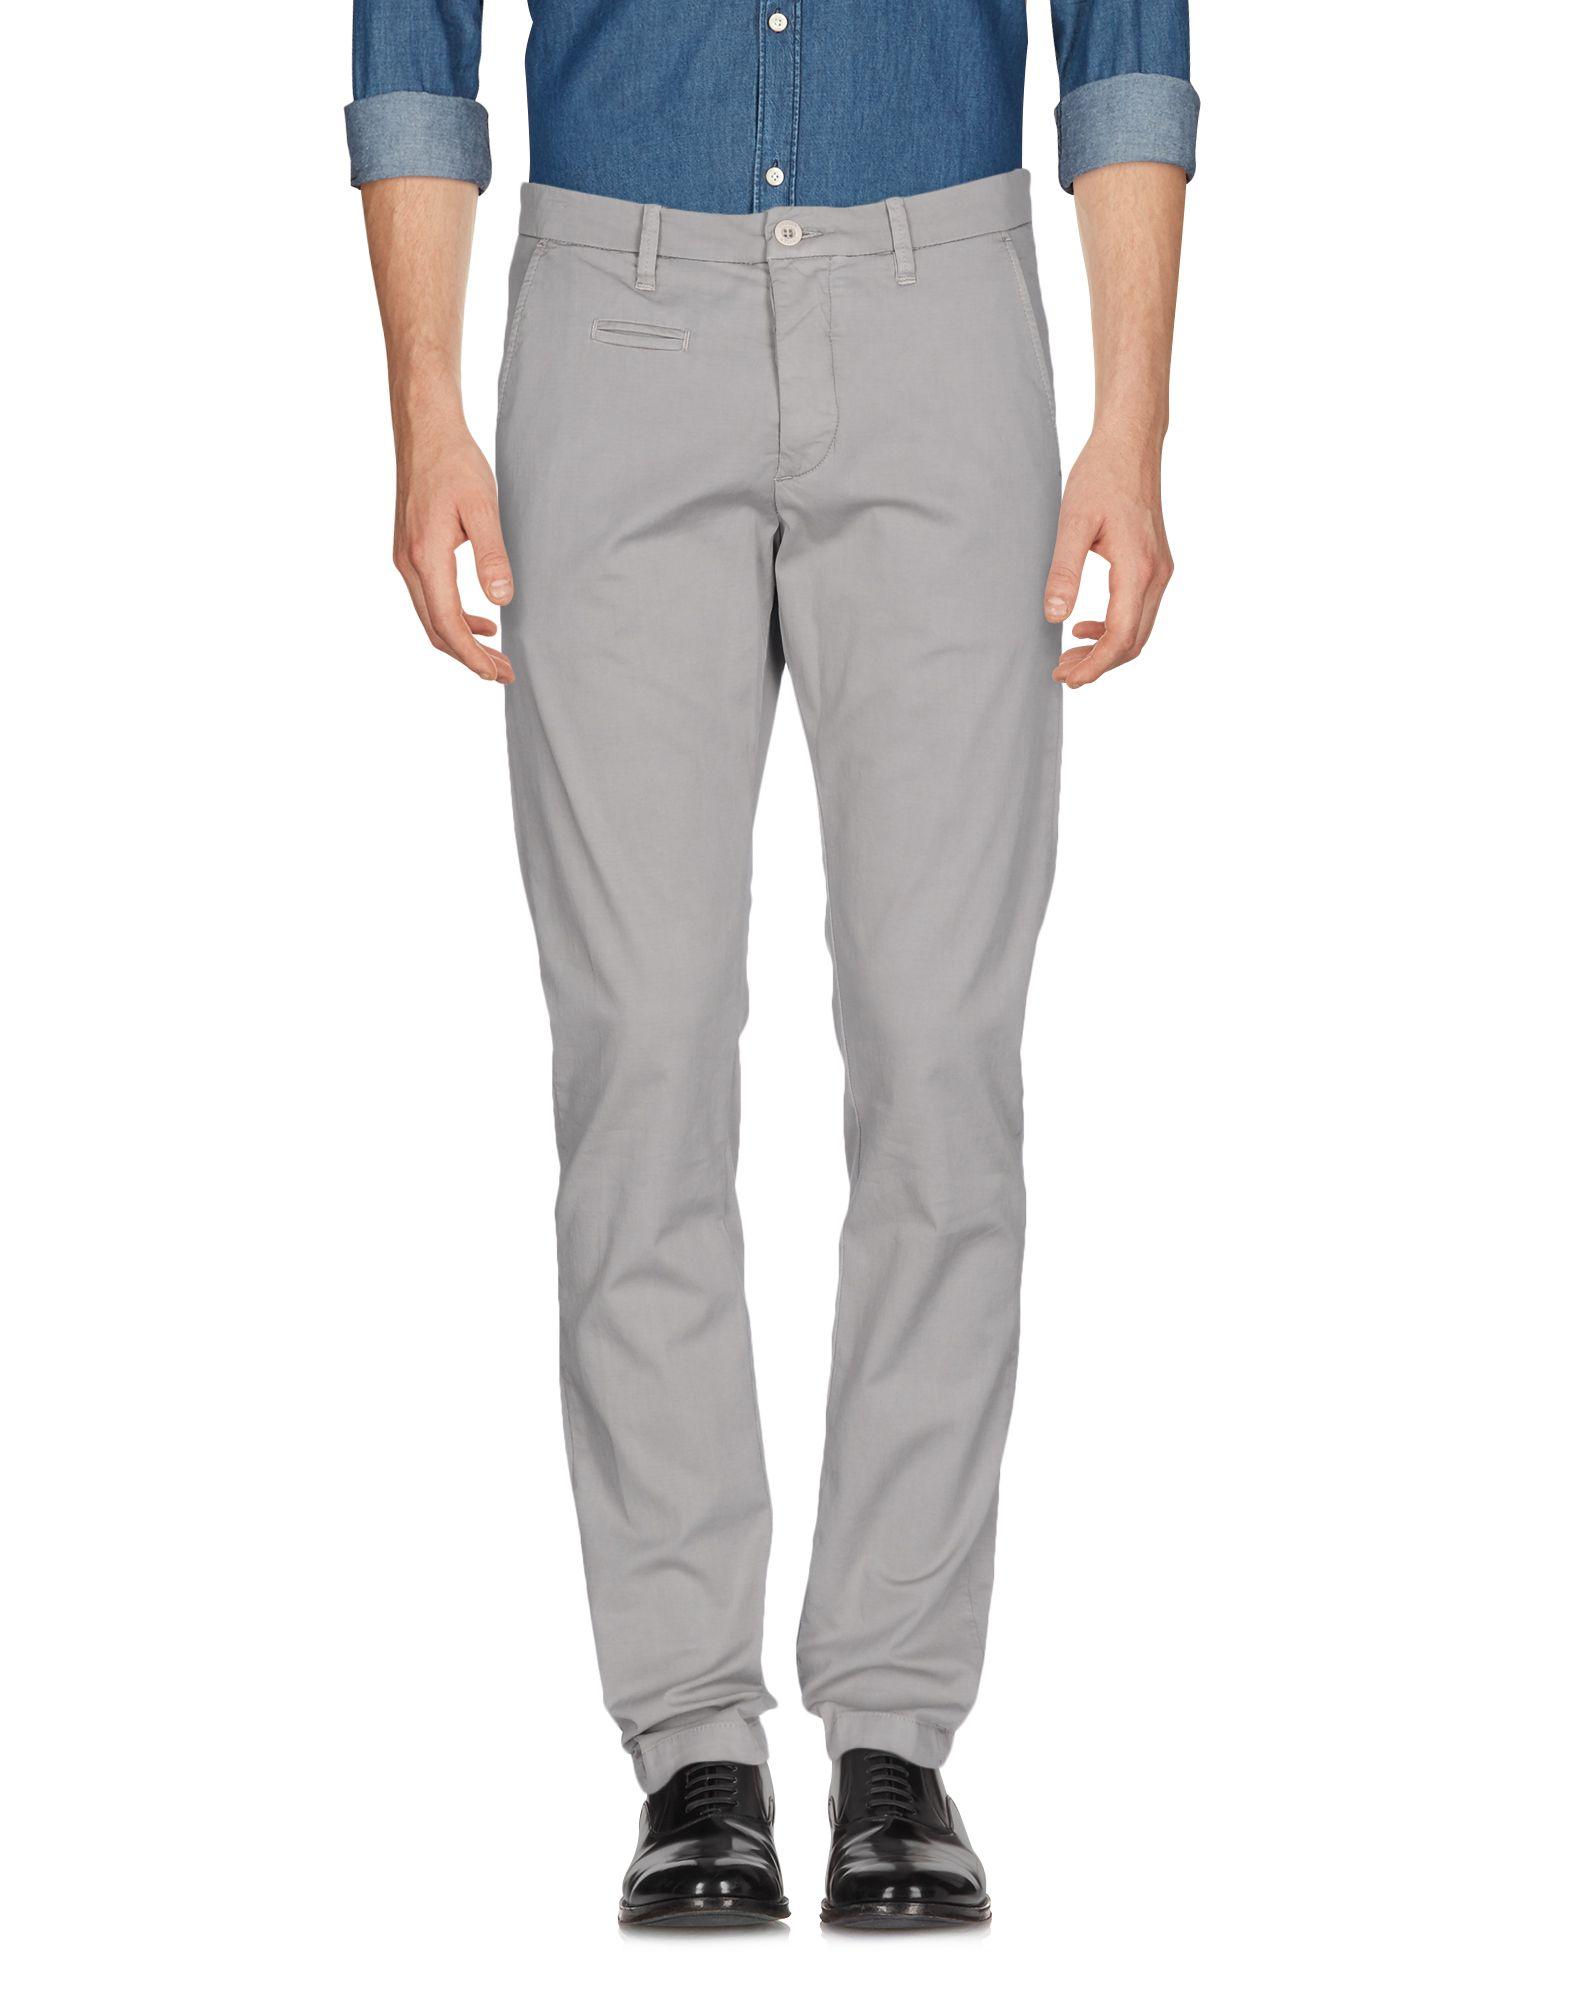 Lyst - Uniform Casual Pants in Gray for Men